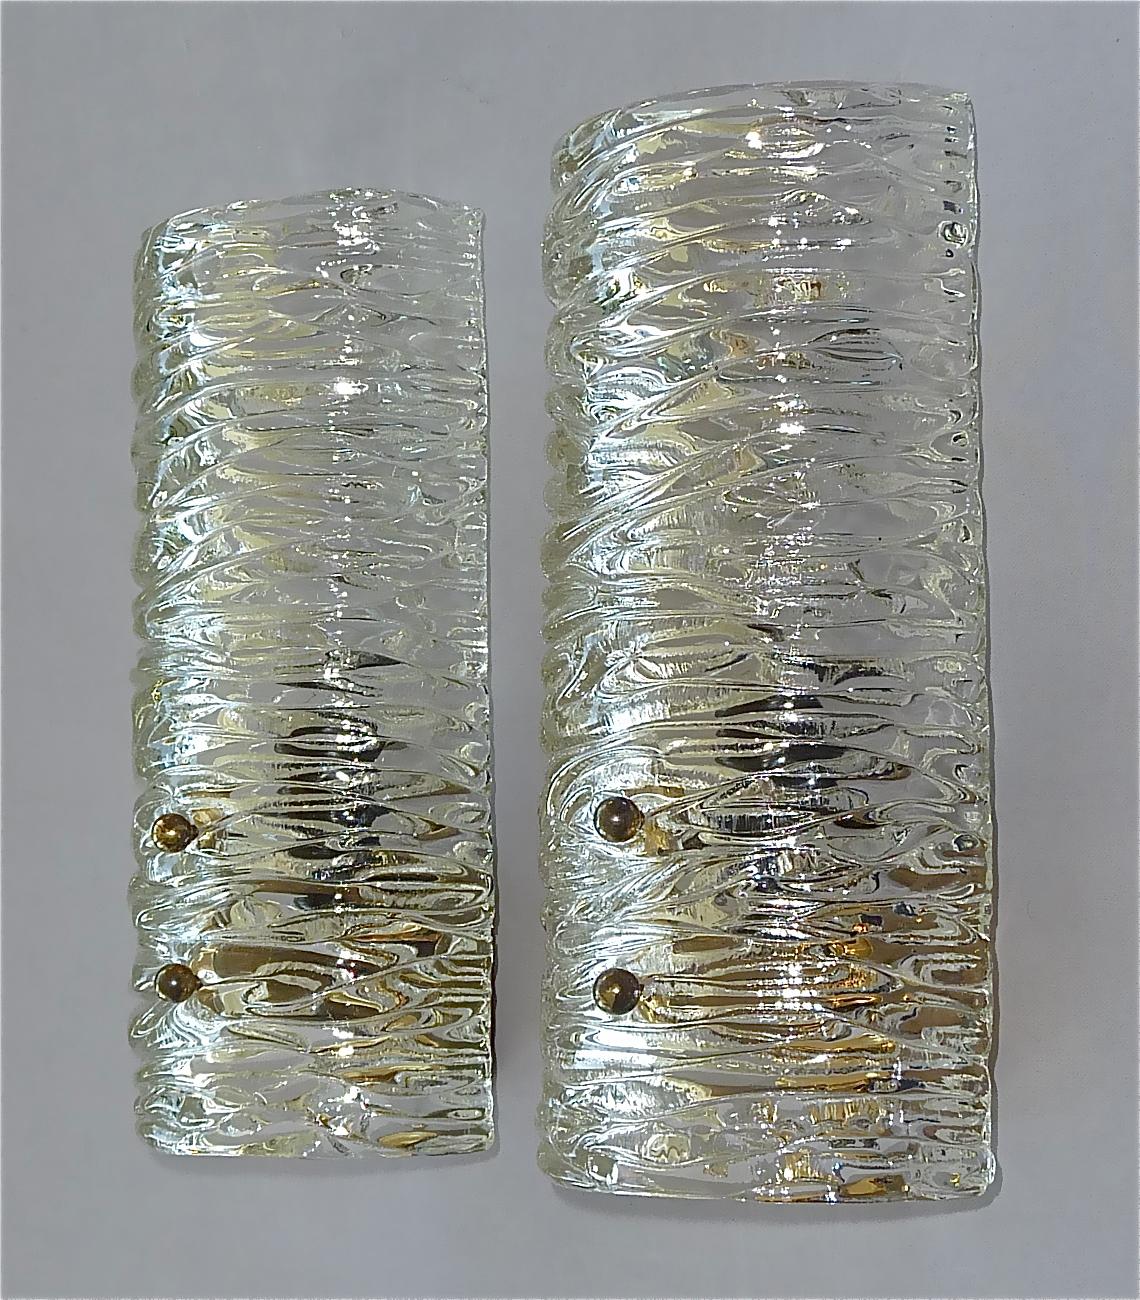 Fabulous pair of vintage Mid-Century J.T. Kalmar textured Murano glass wall lights, Austria circa 1950s to 1960s. Both sconces have a patinated brass base with one plastic fitting each for one E14 standard screw bulb to illuminate, a bent glass